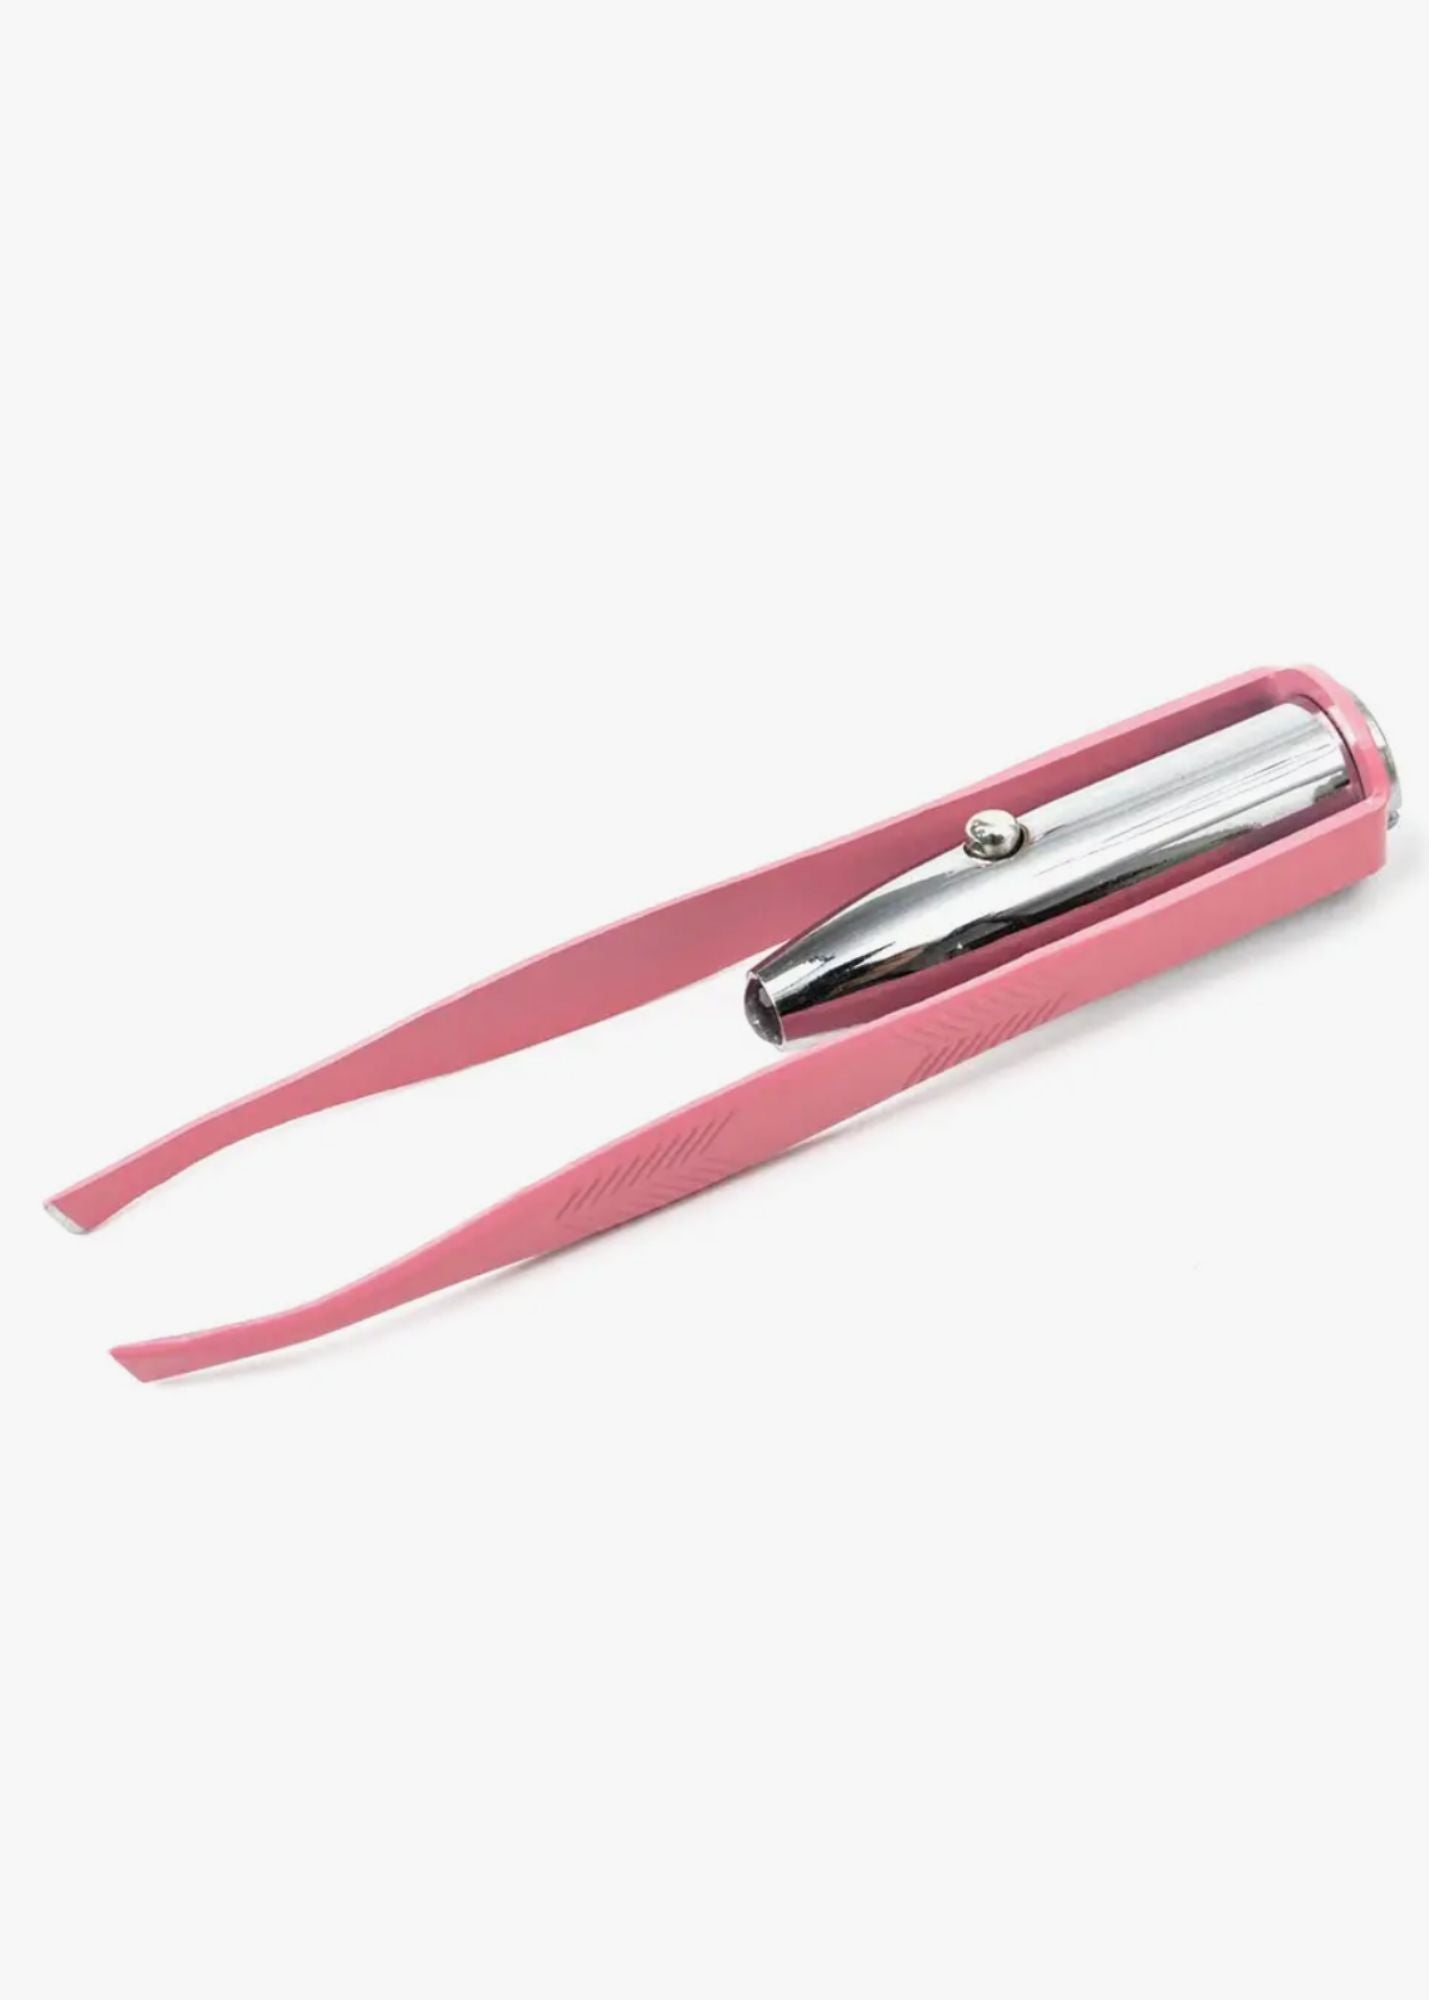 Light Up Stainless Steel Tweezers Gifts Pink